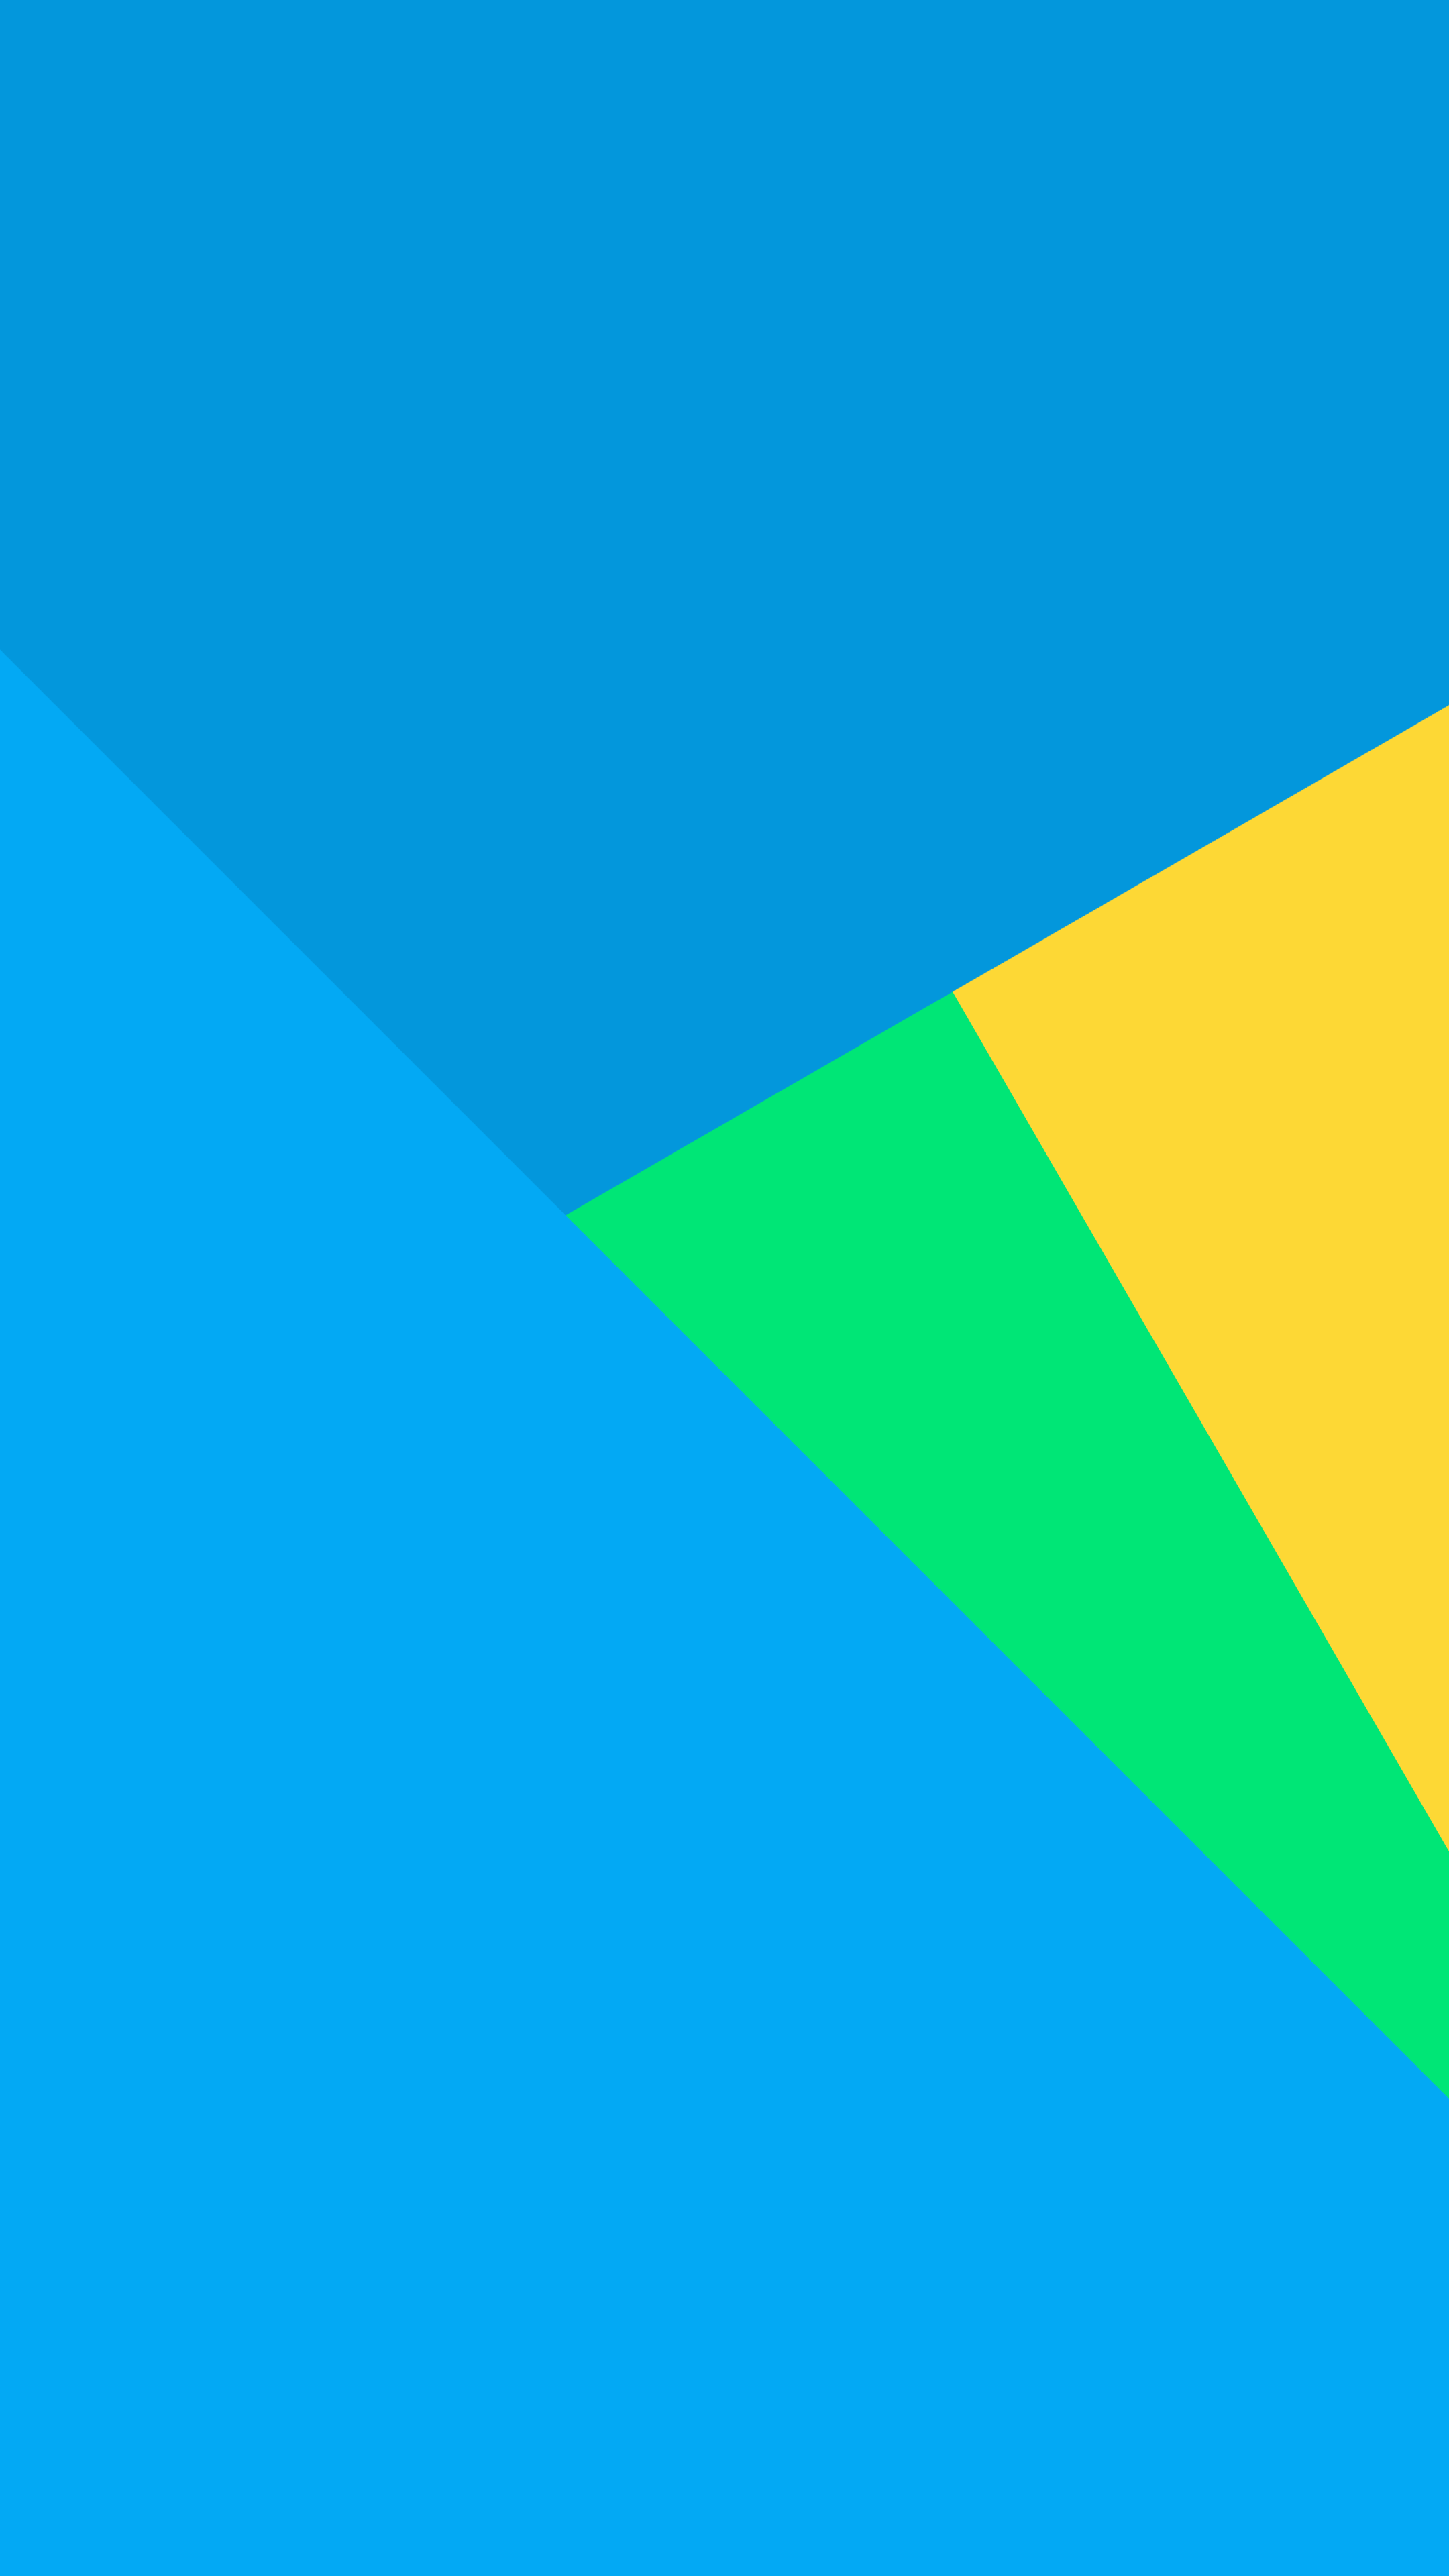 COLLECTION: MATERIAL DESIGN INSPIRED WALLPAPERS